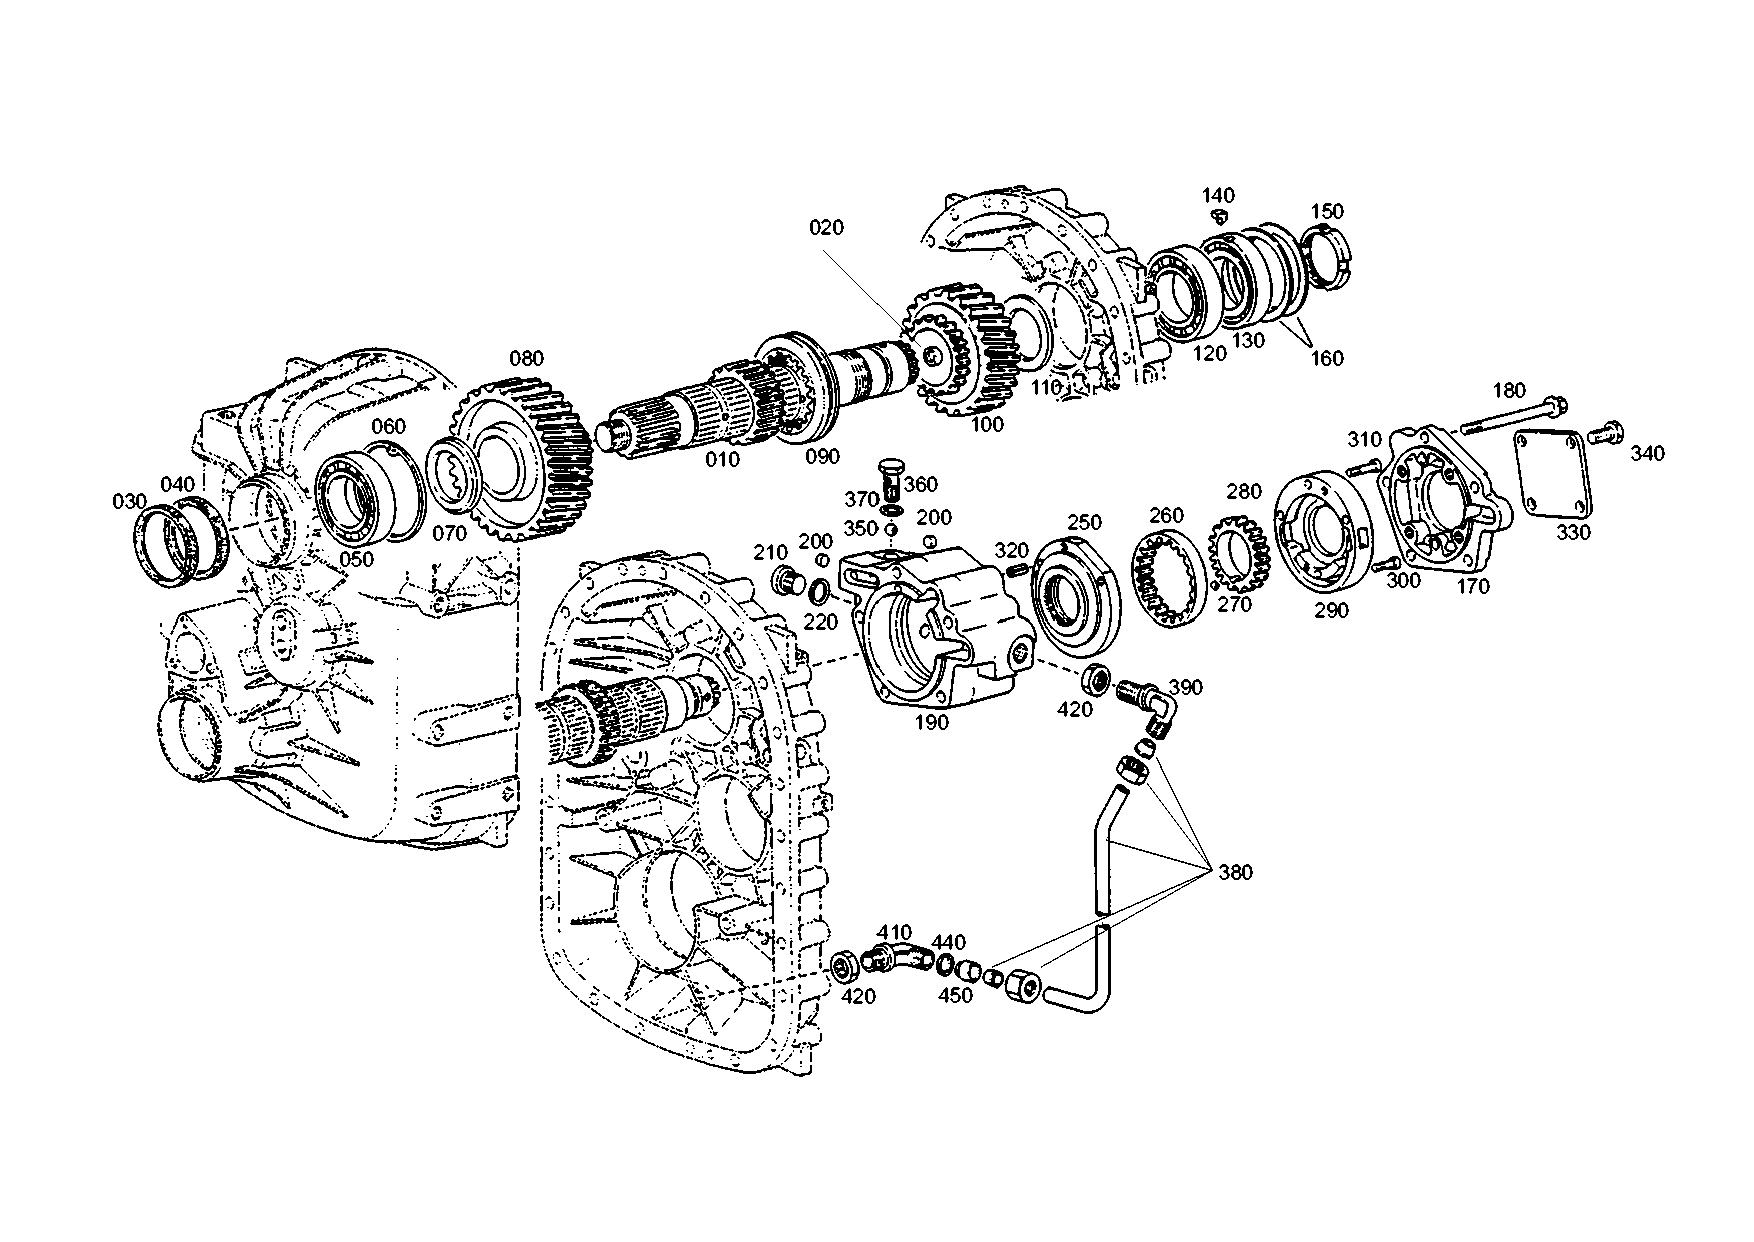 drawing for GINAF 1-99-916-002 - COVER (figure 3)